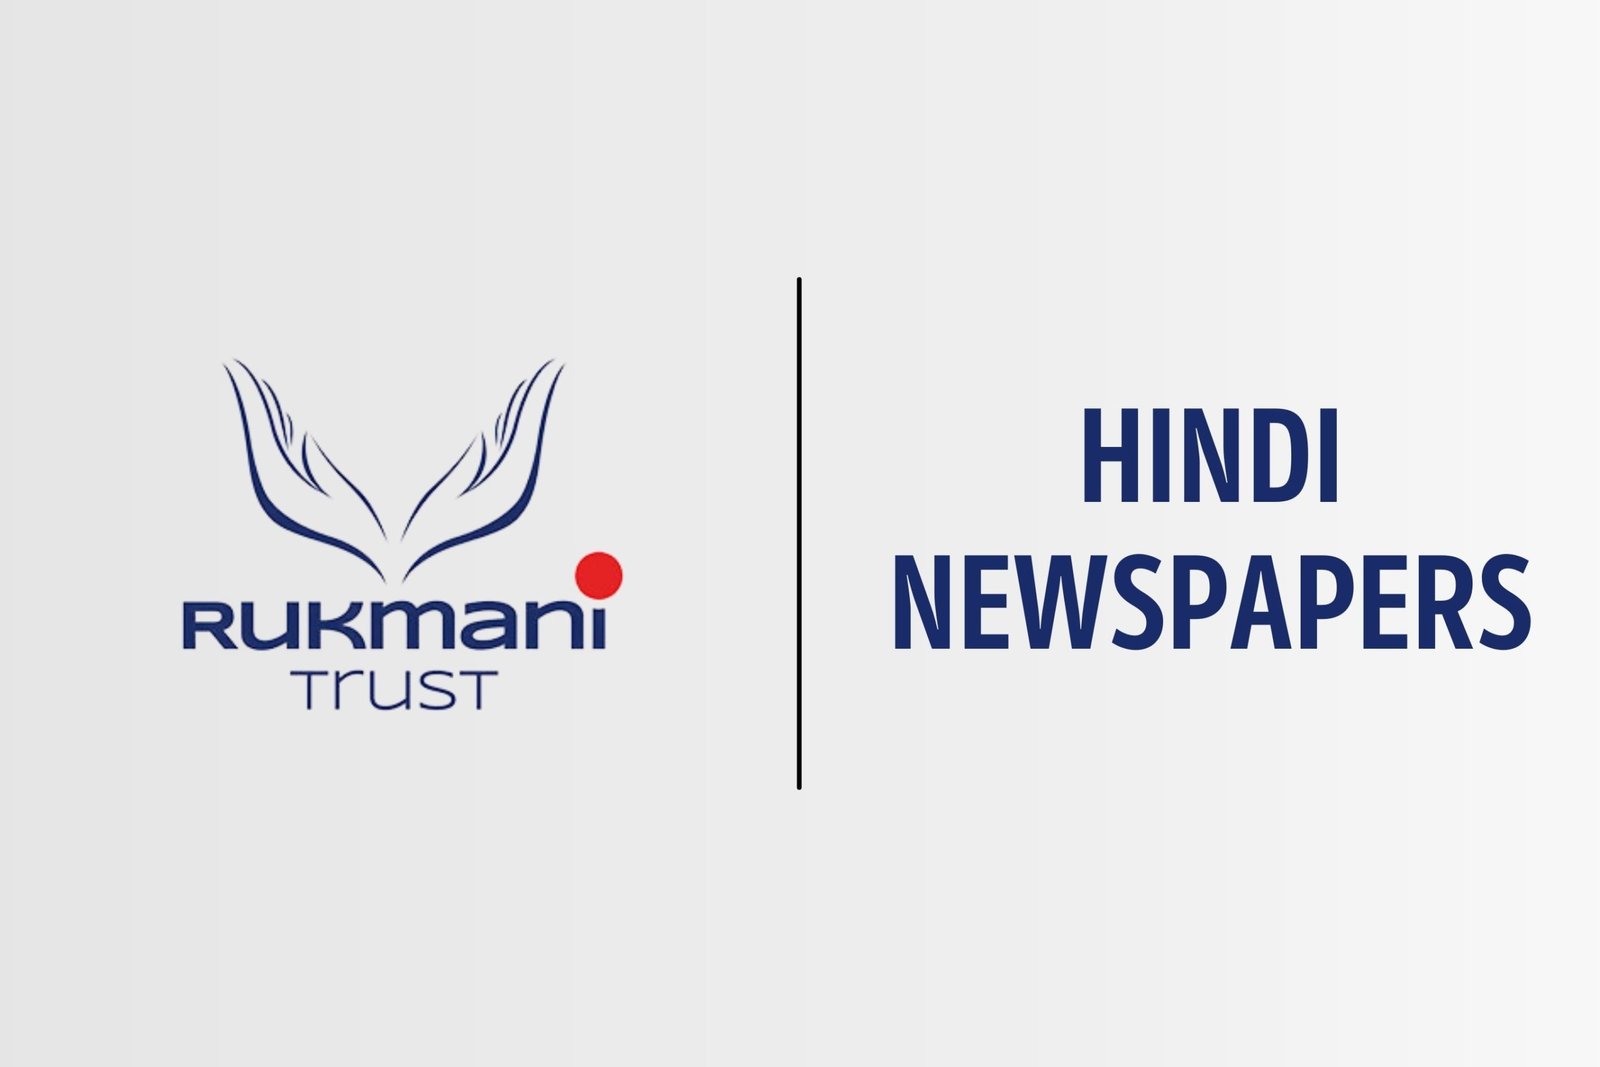 Hindi Newspapers Write About Rukmani Trust’s Tie Up With Tata Trusts